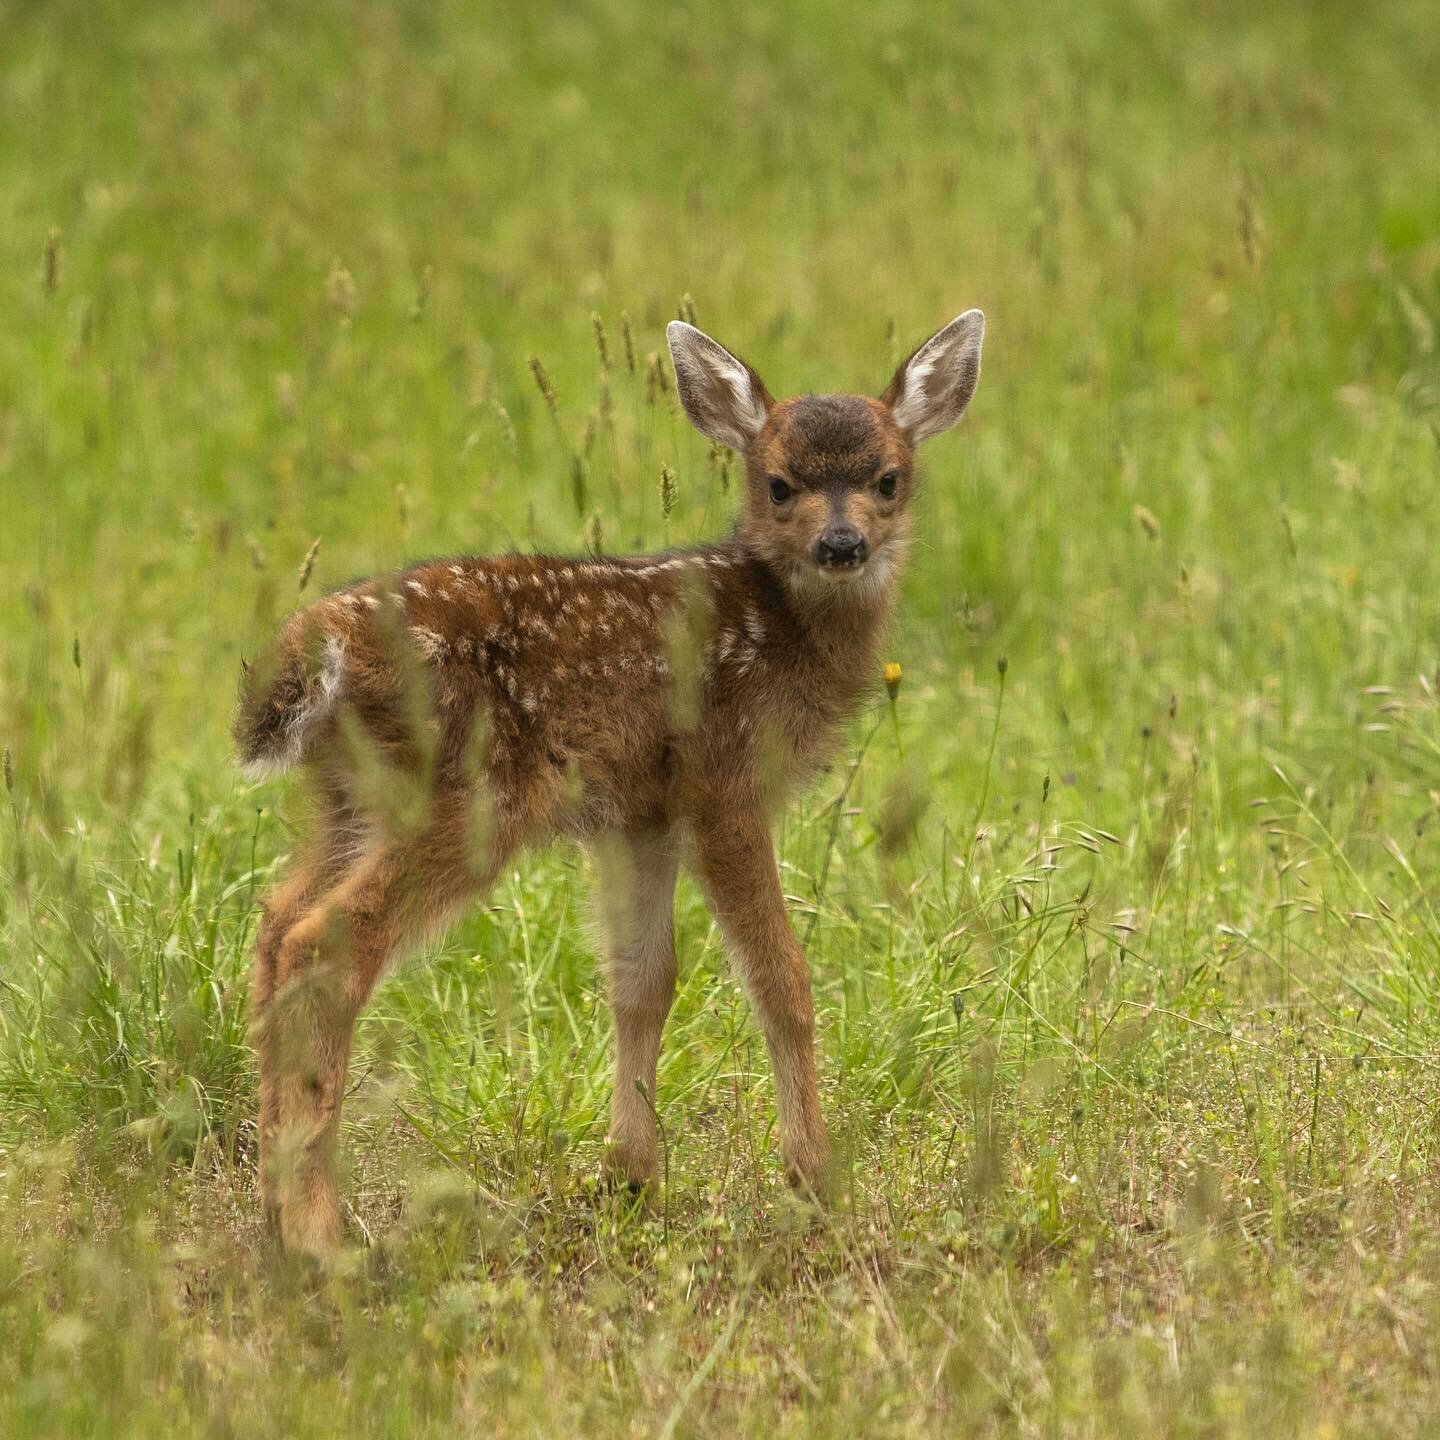 See this outfit, love it, couldn&rsquo;t wear it #deer #blacktaileddeer #fawn #polkadots #green #grass #spring #lush #hey #sooke #sookebc #vancouverisland #pnw #beautifulbc #hellobc